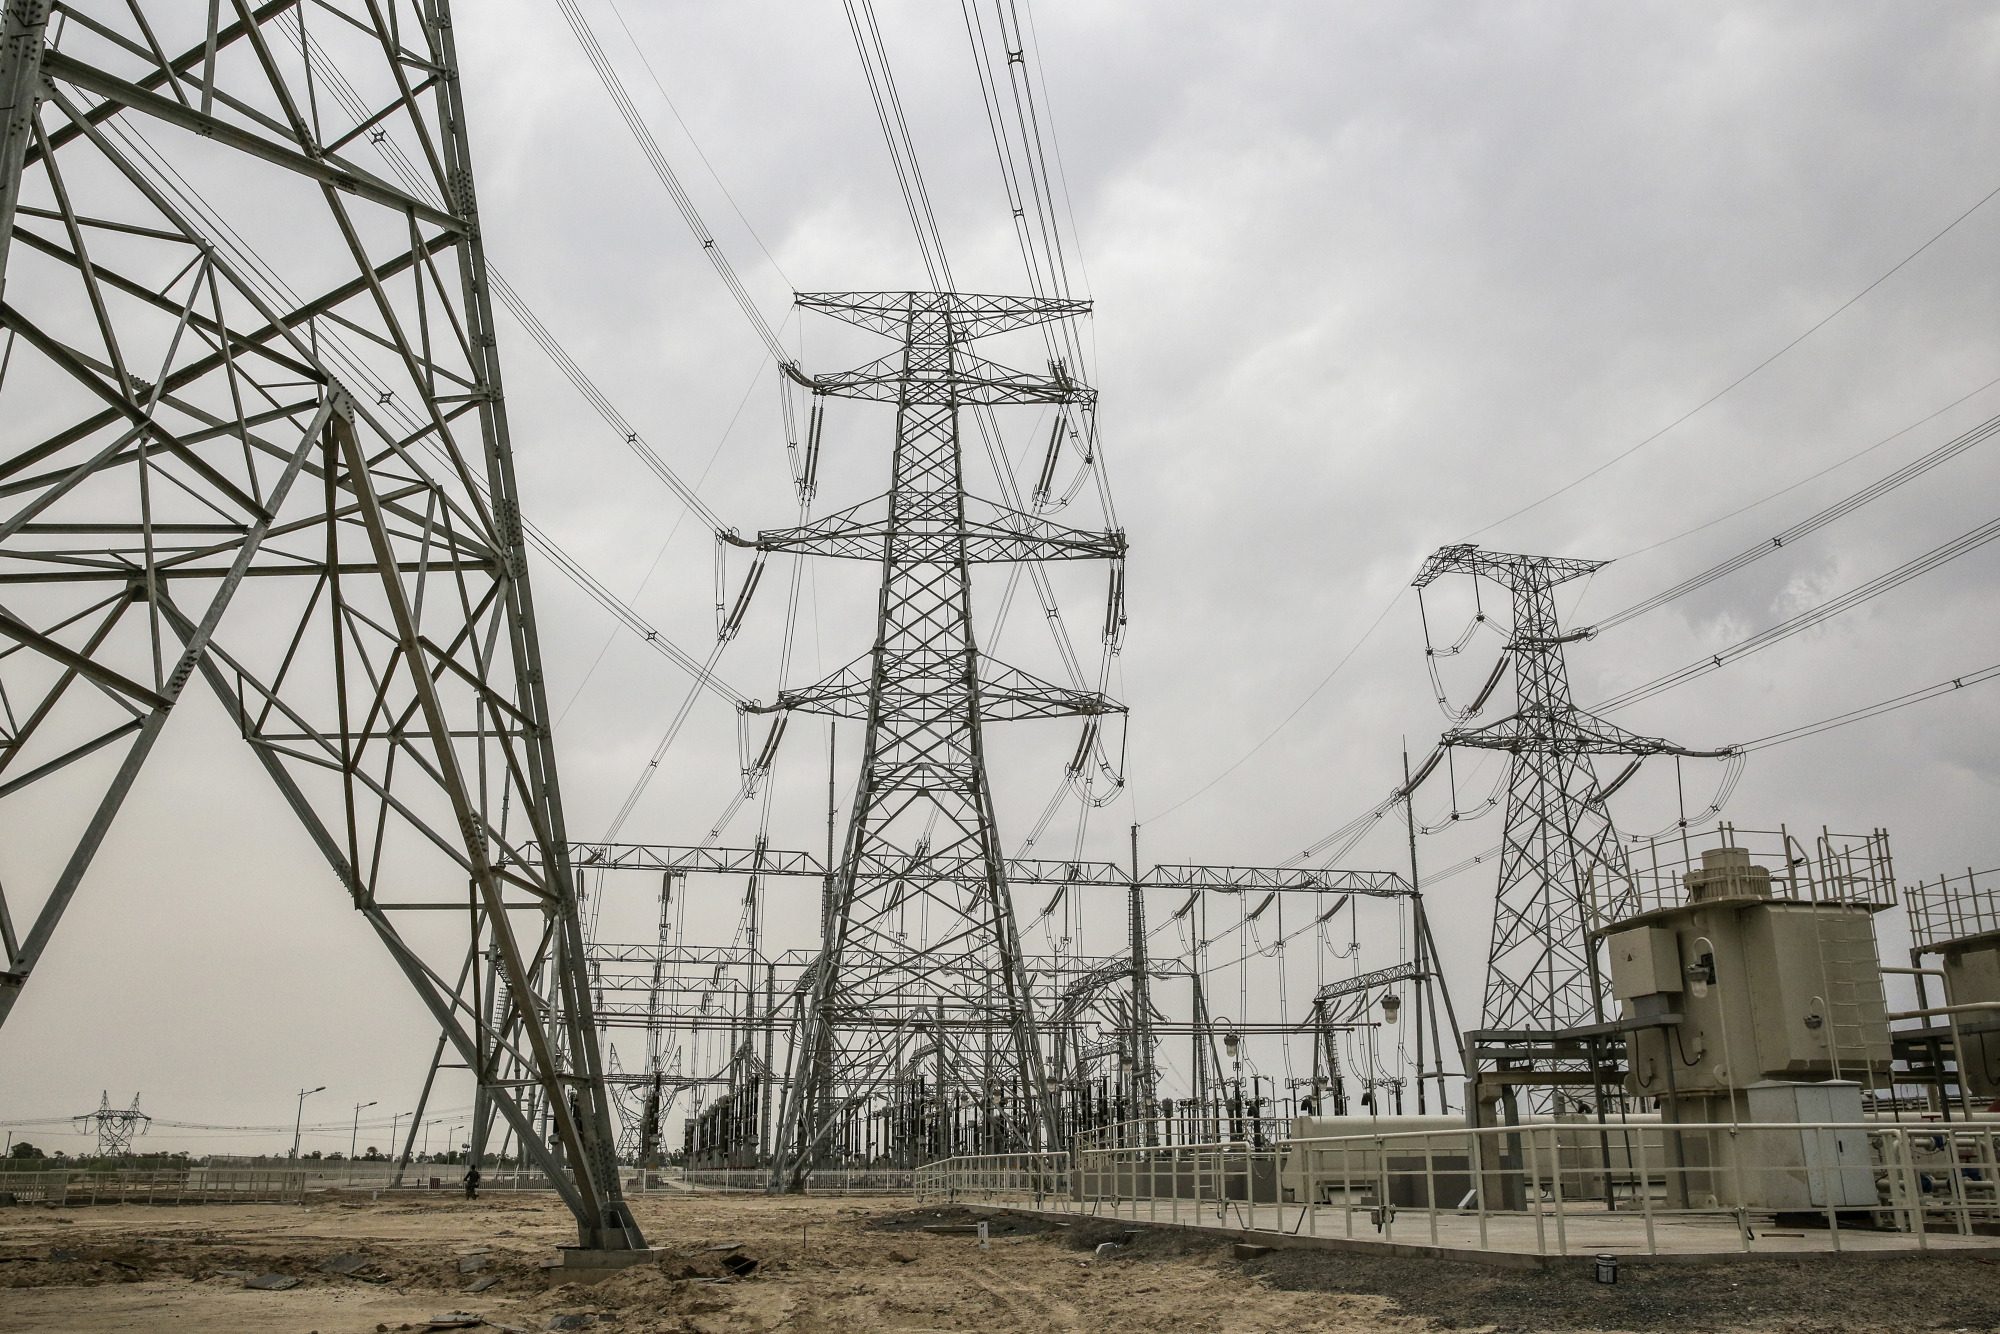 GIC-backed Greenko, ReNew Power keen to buy out discom in India's Chandigarh